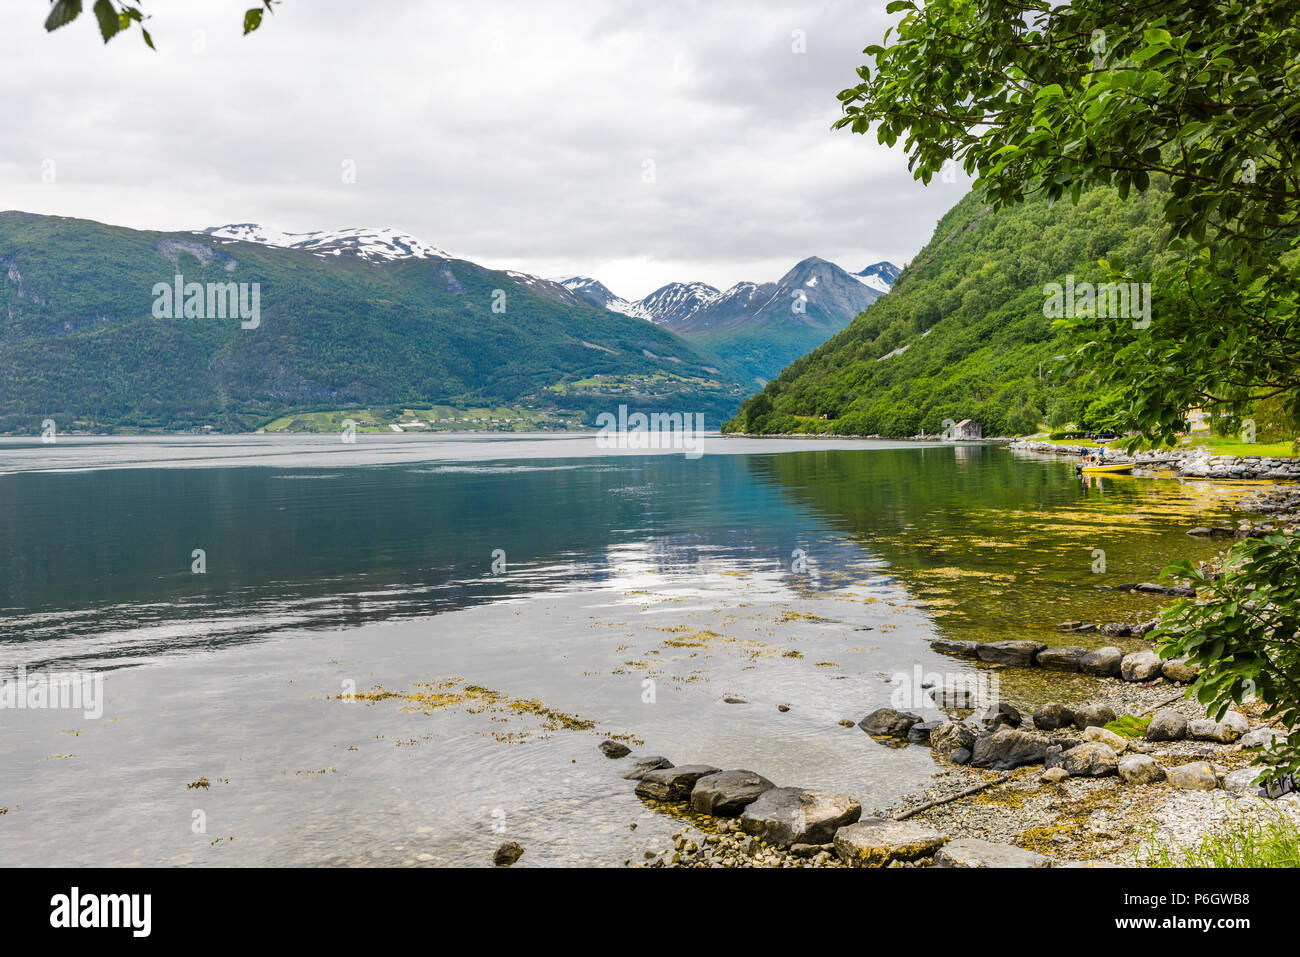 fjord view at the shore of Norddal, Norway, the Norddalsfjorden near Eidsdal and eagle road Stock Photo